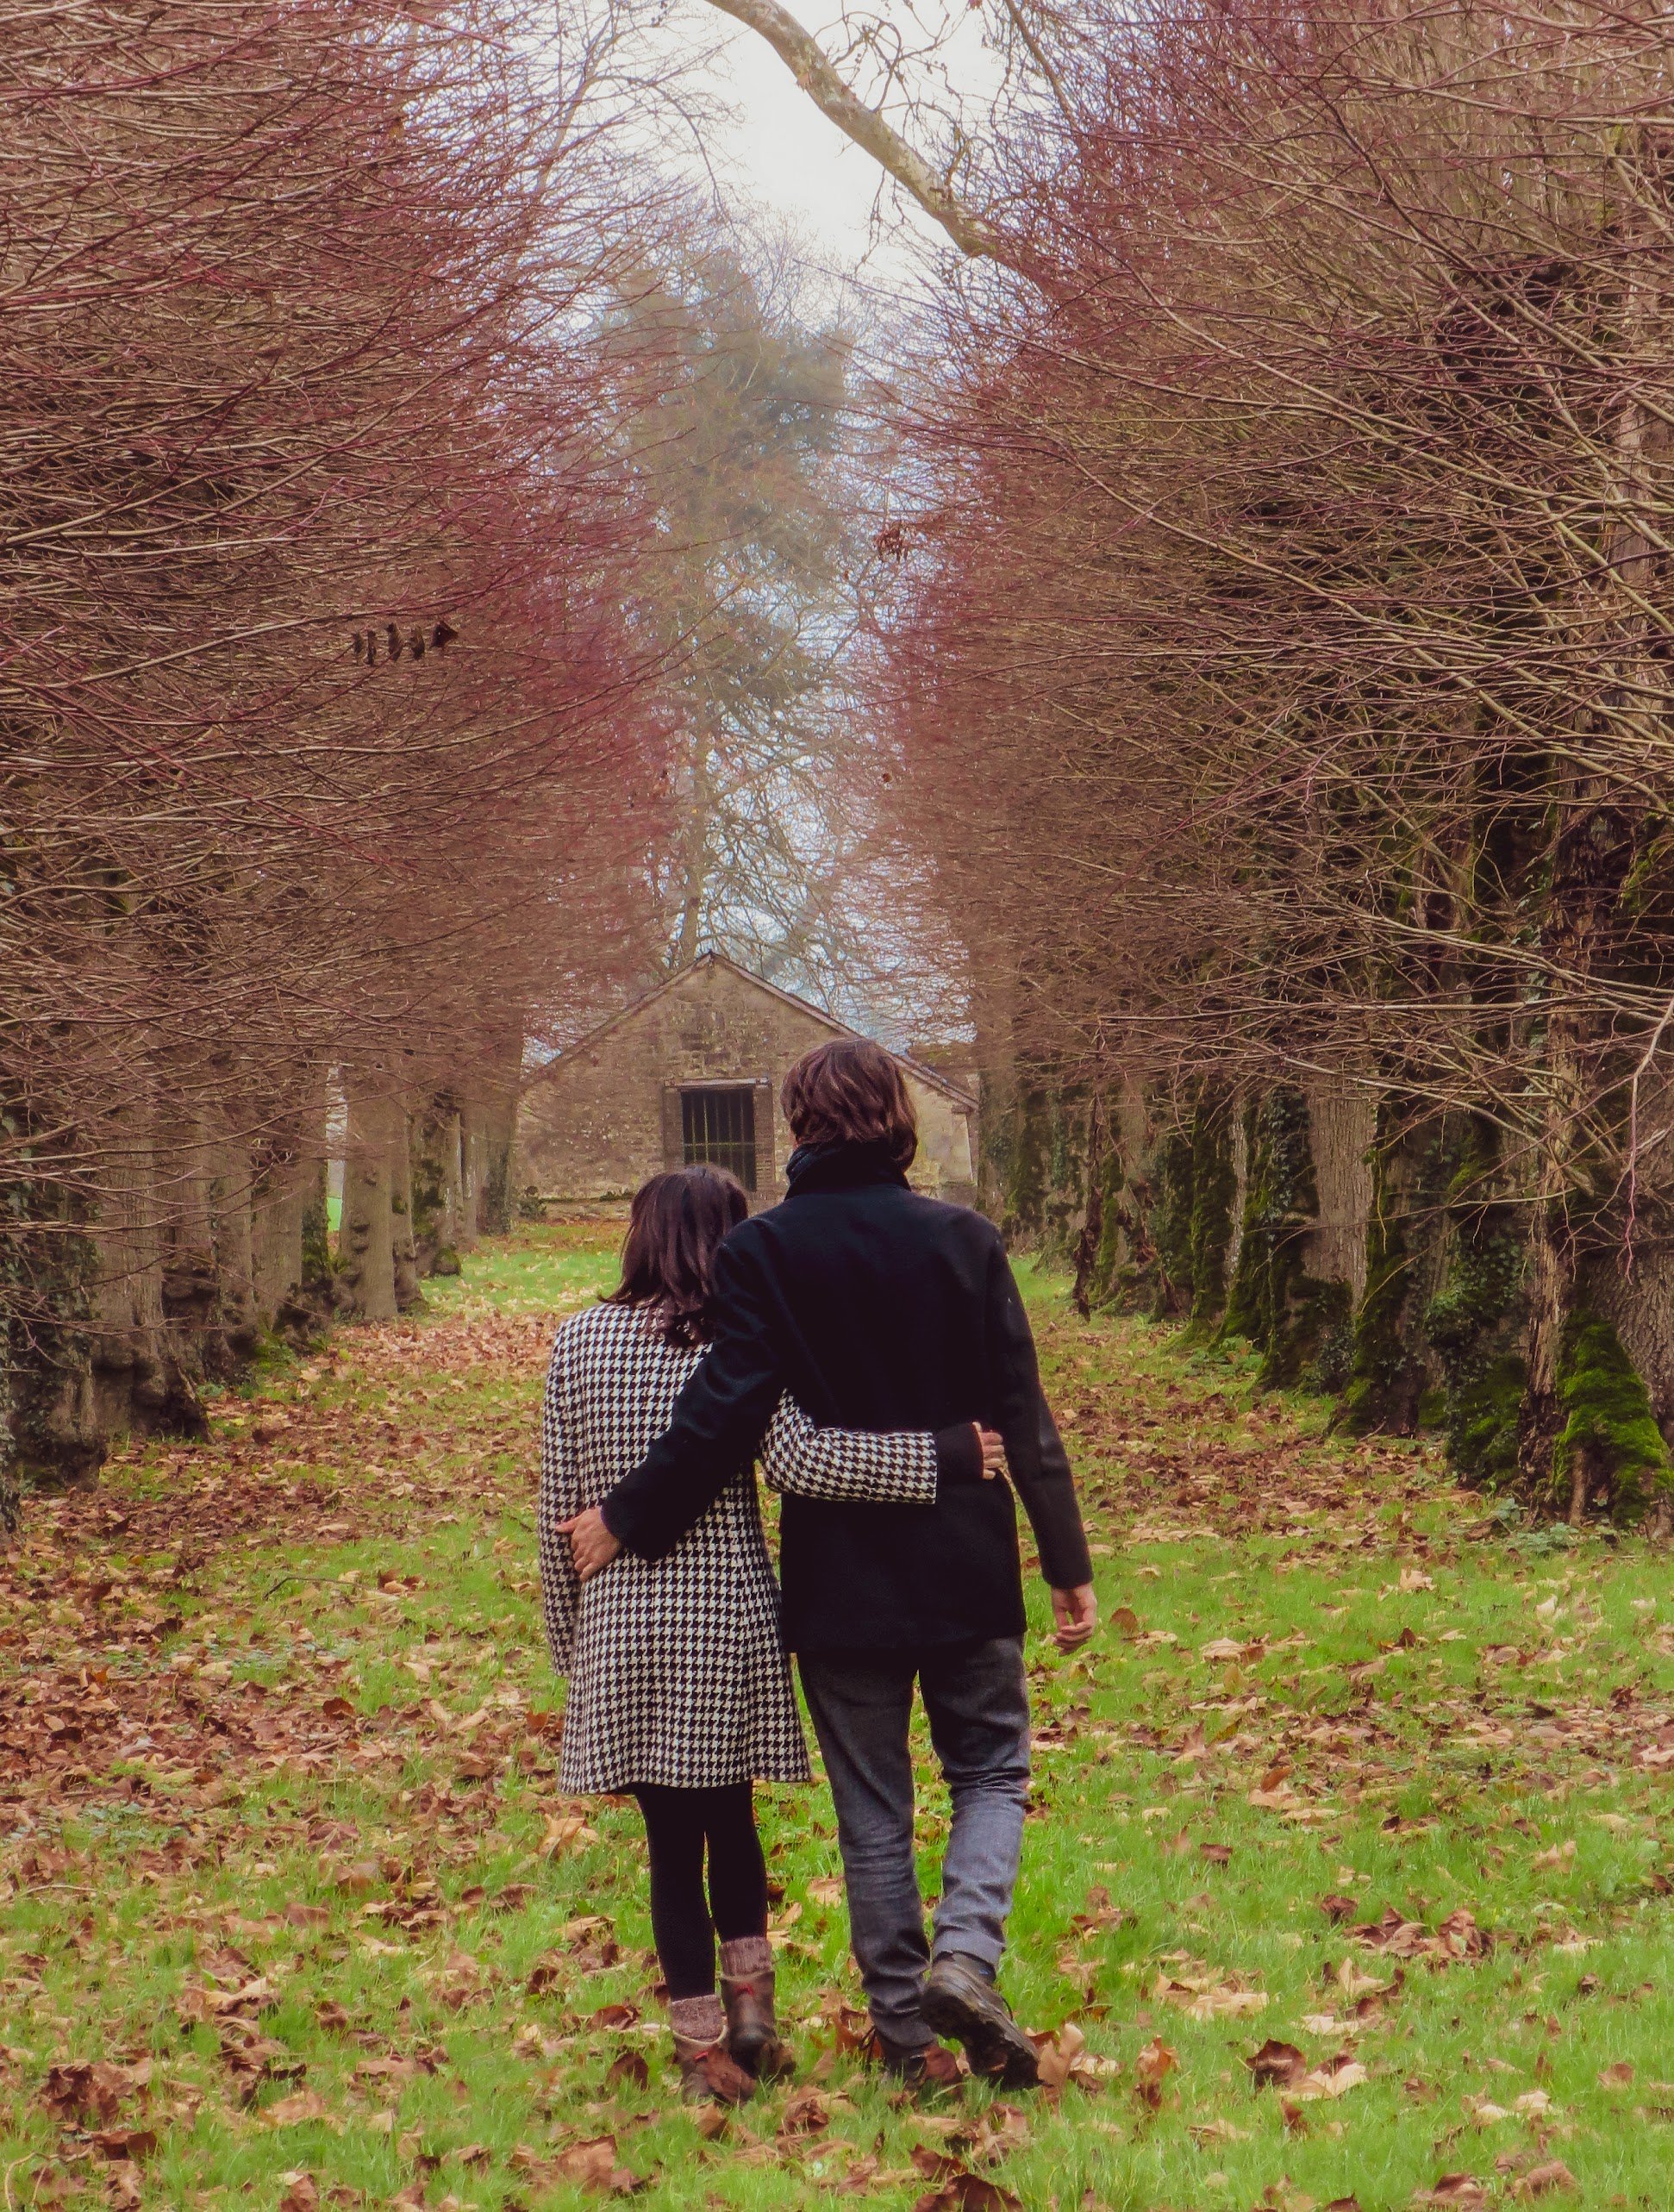 A couple strolling down the Linden Alley in Autumn during their French chateau holiday.